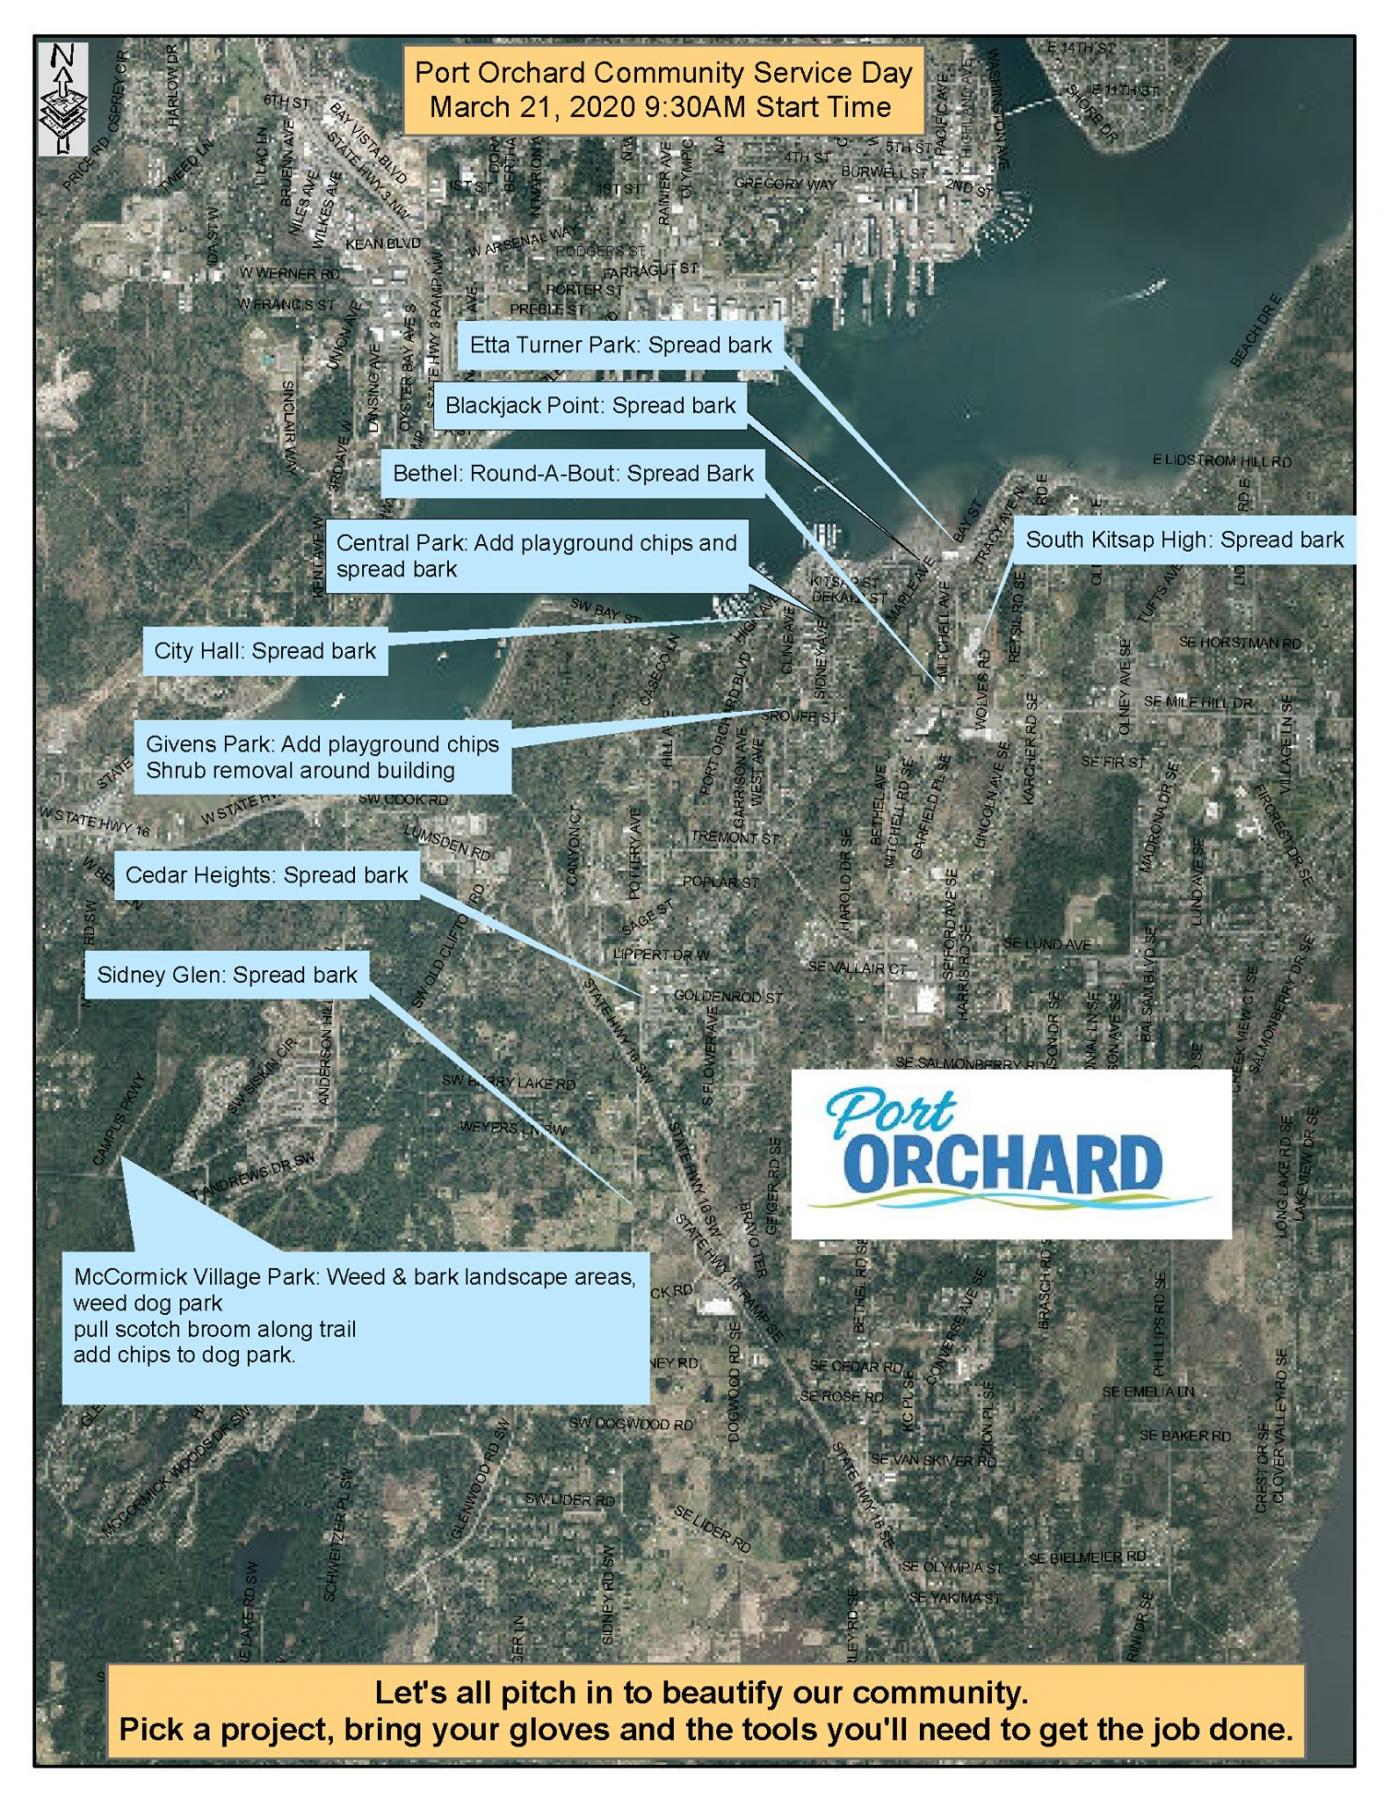 Port Orchard Community Service Day 2020 Map